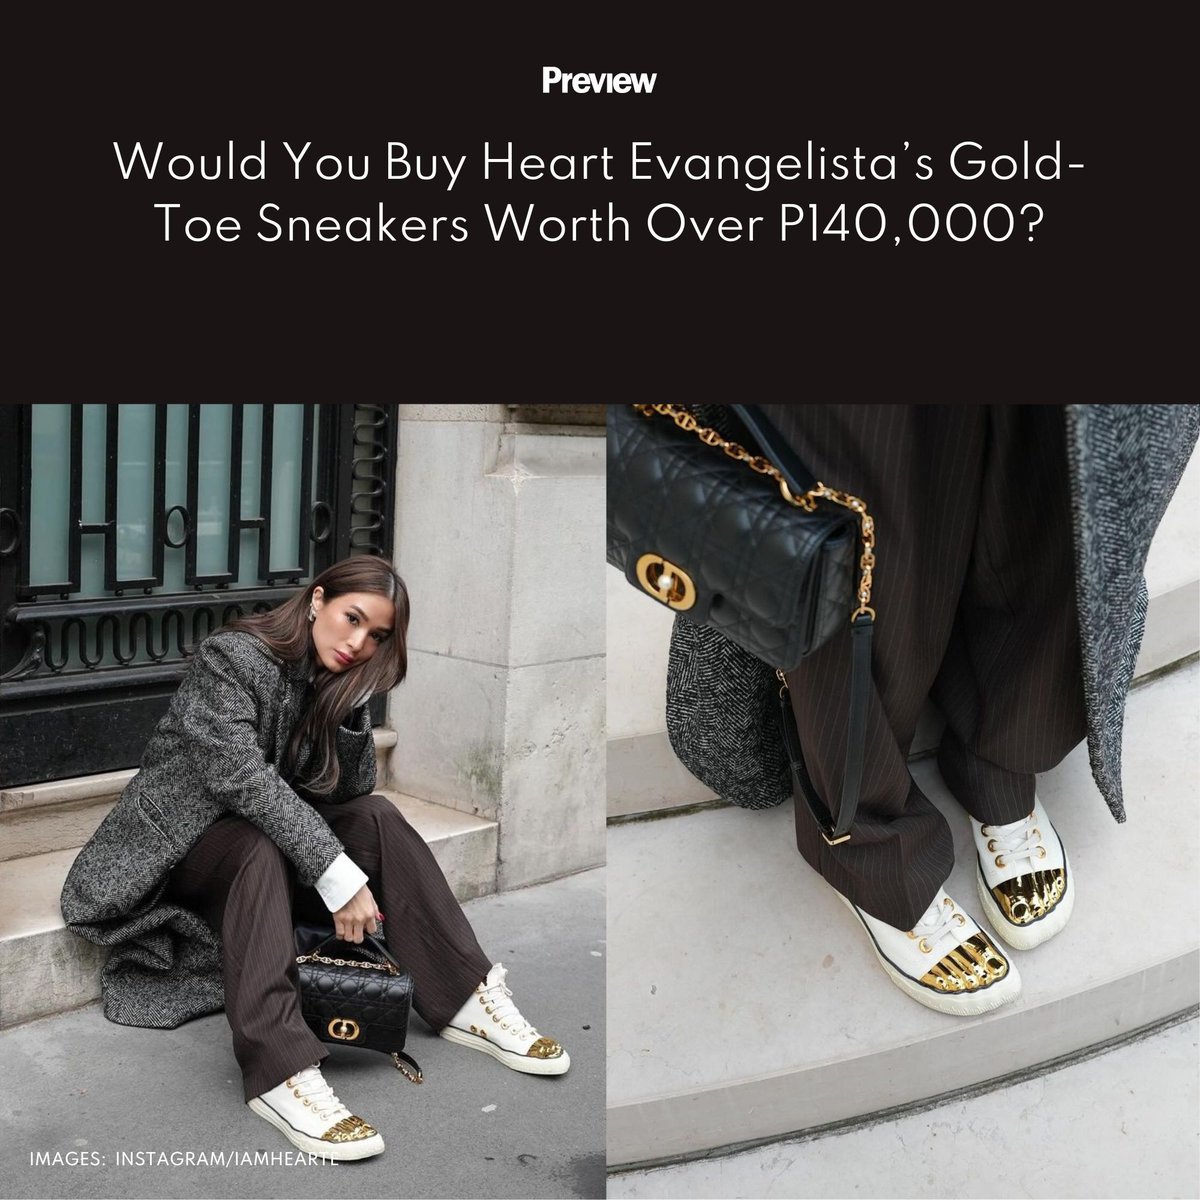 #HeartEvangelista was definitely stepping out in style!

Get a closer look at her avant-garde sneakers here: bit.ly/4aVQNBh